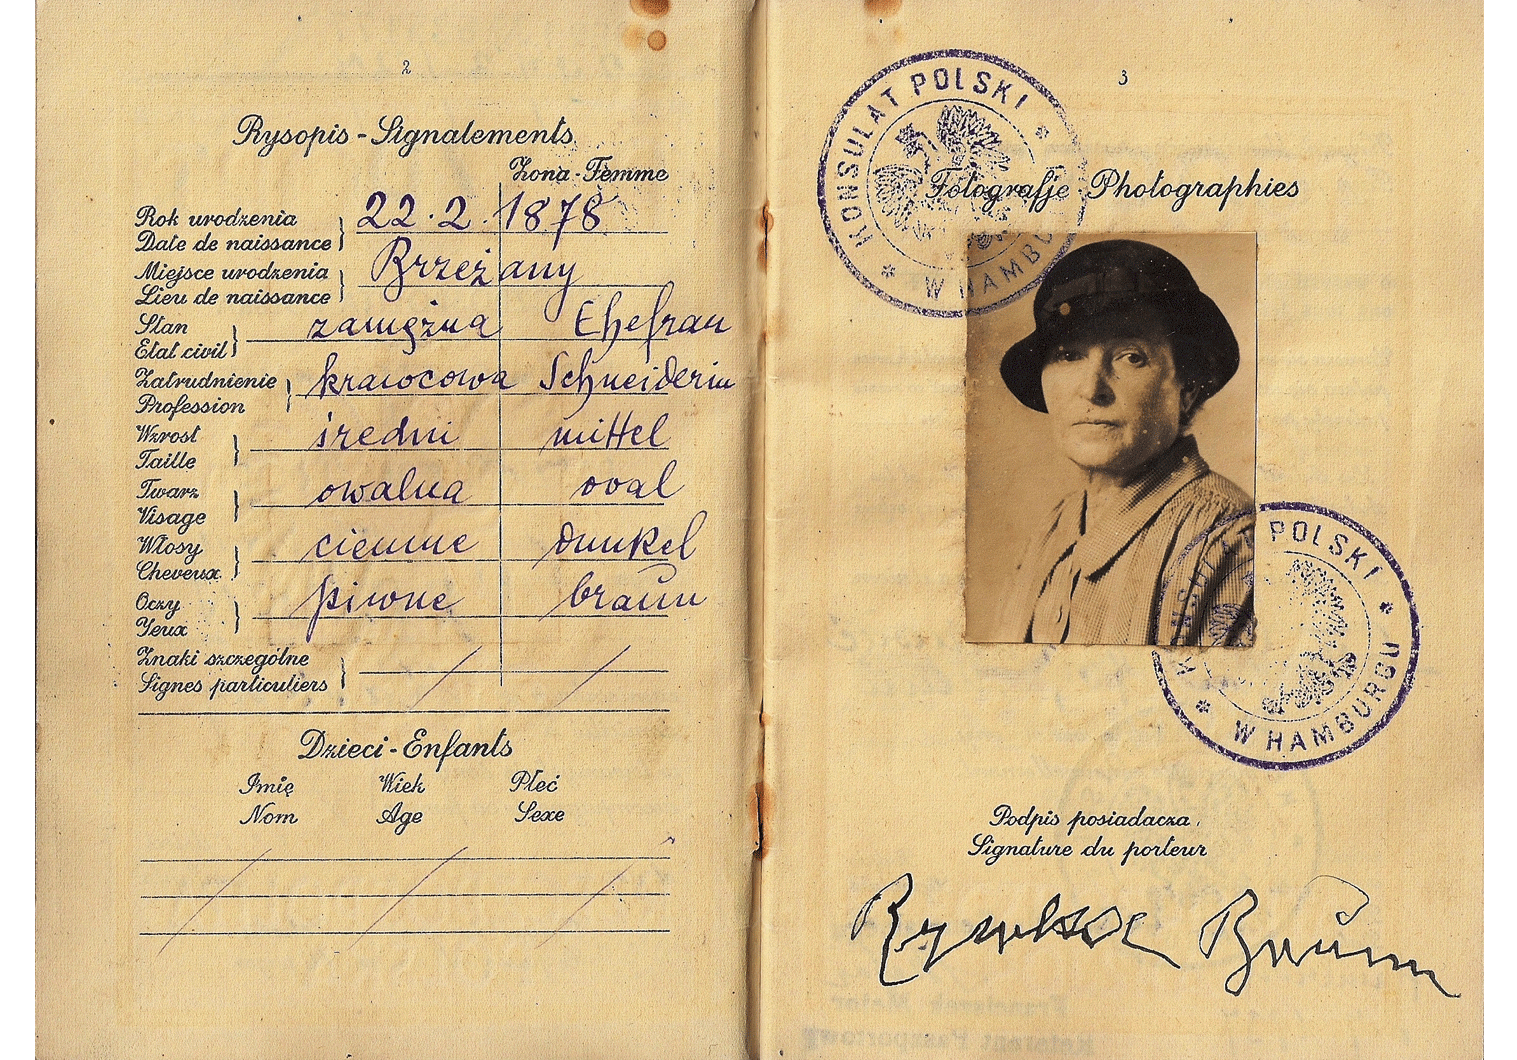 A Jewess that was expelled to Zbaszyn in 1938.